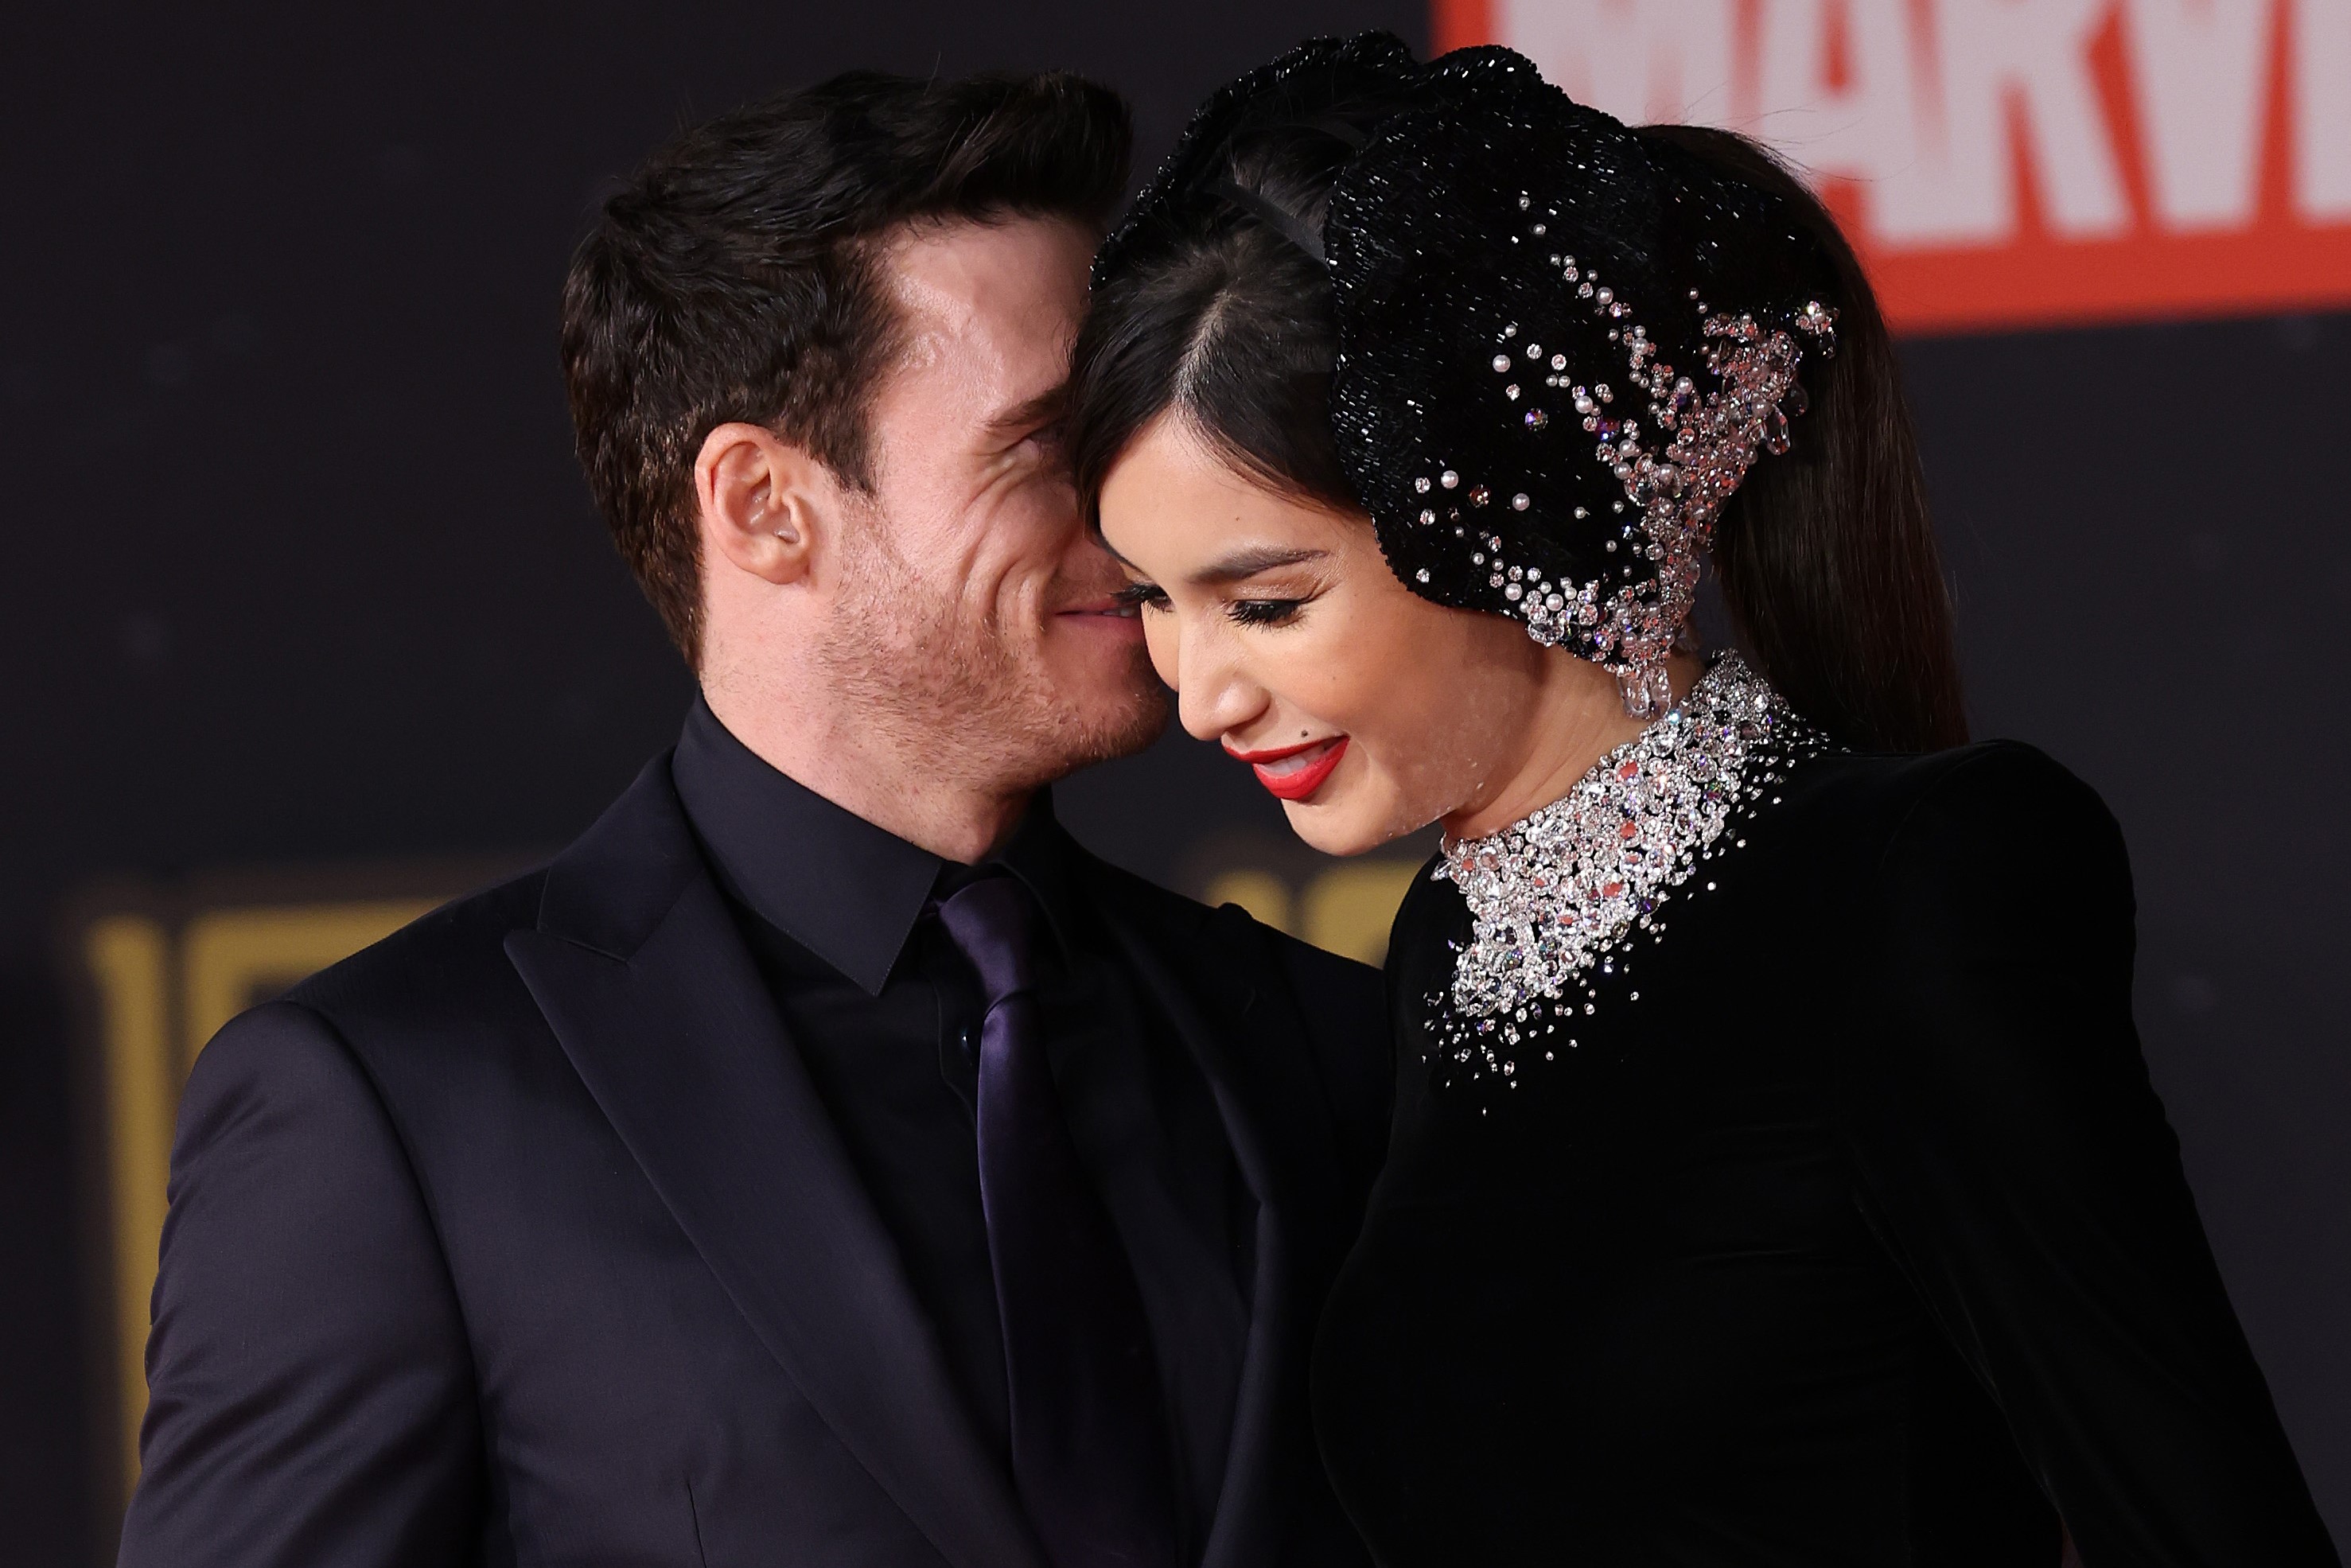 'Eternals' stars Richard Madden and Gemma Chan on the red carpet. Madden wears a dark blue suit and tie. Chan wears a black dress that is studded with diamonds along the collar, and she wears a black headpiece studded with diamonds and pearls. Madden is whispering something into Chan's ear, and she is smiling. Their two characters have a sex scene in the film.